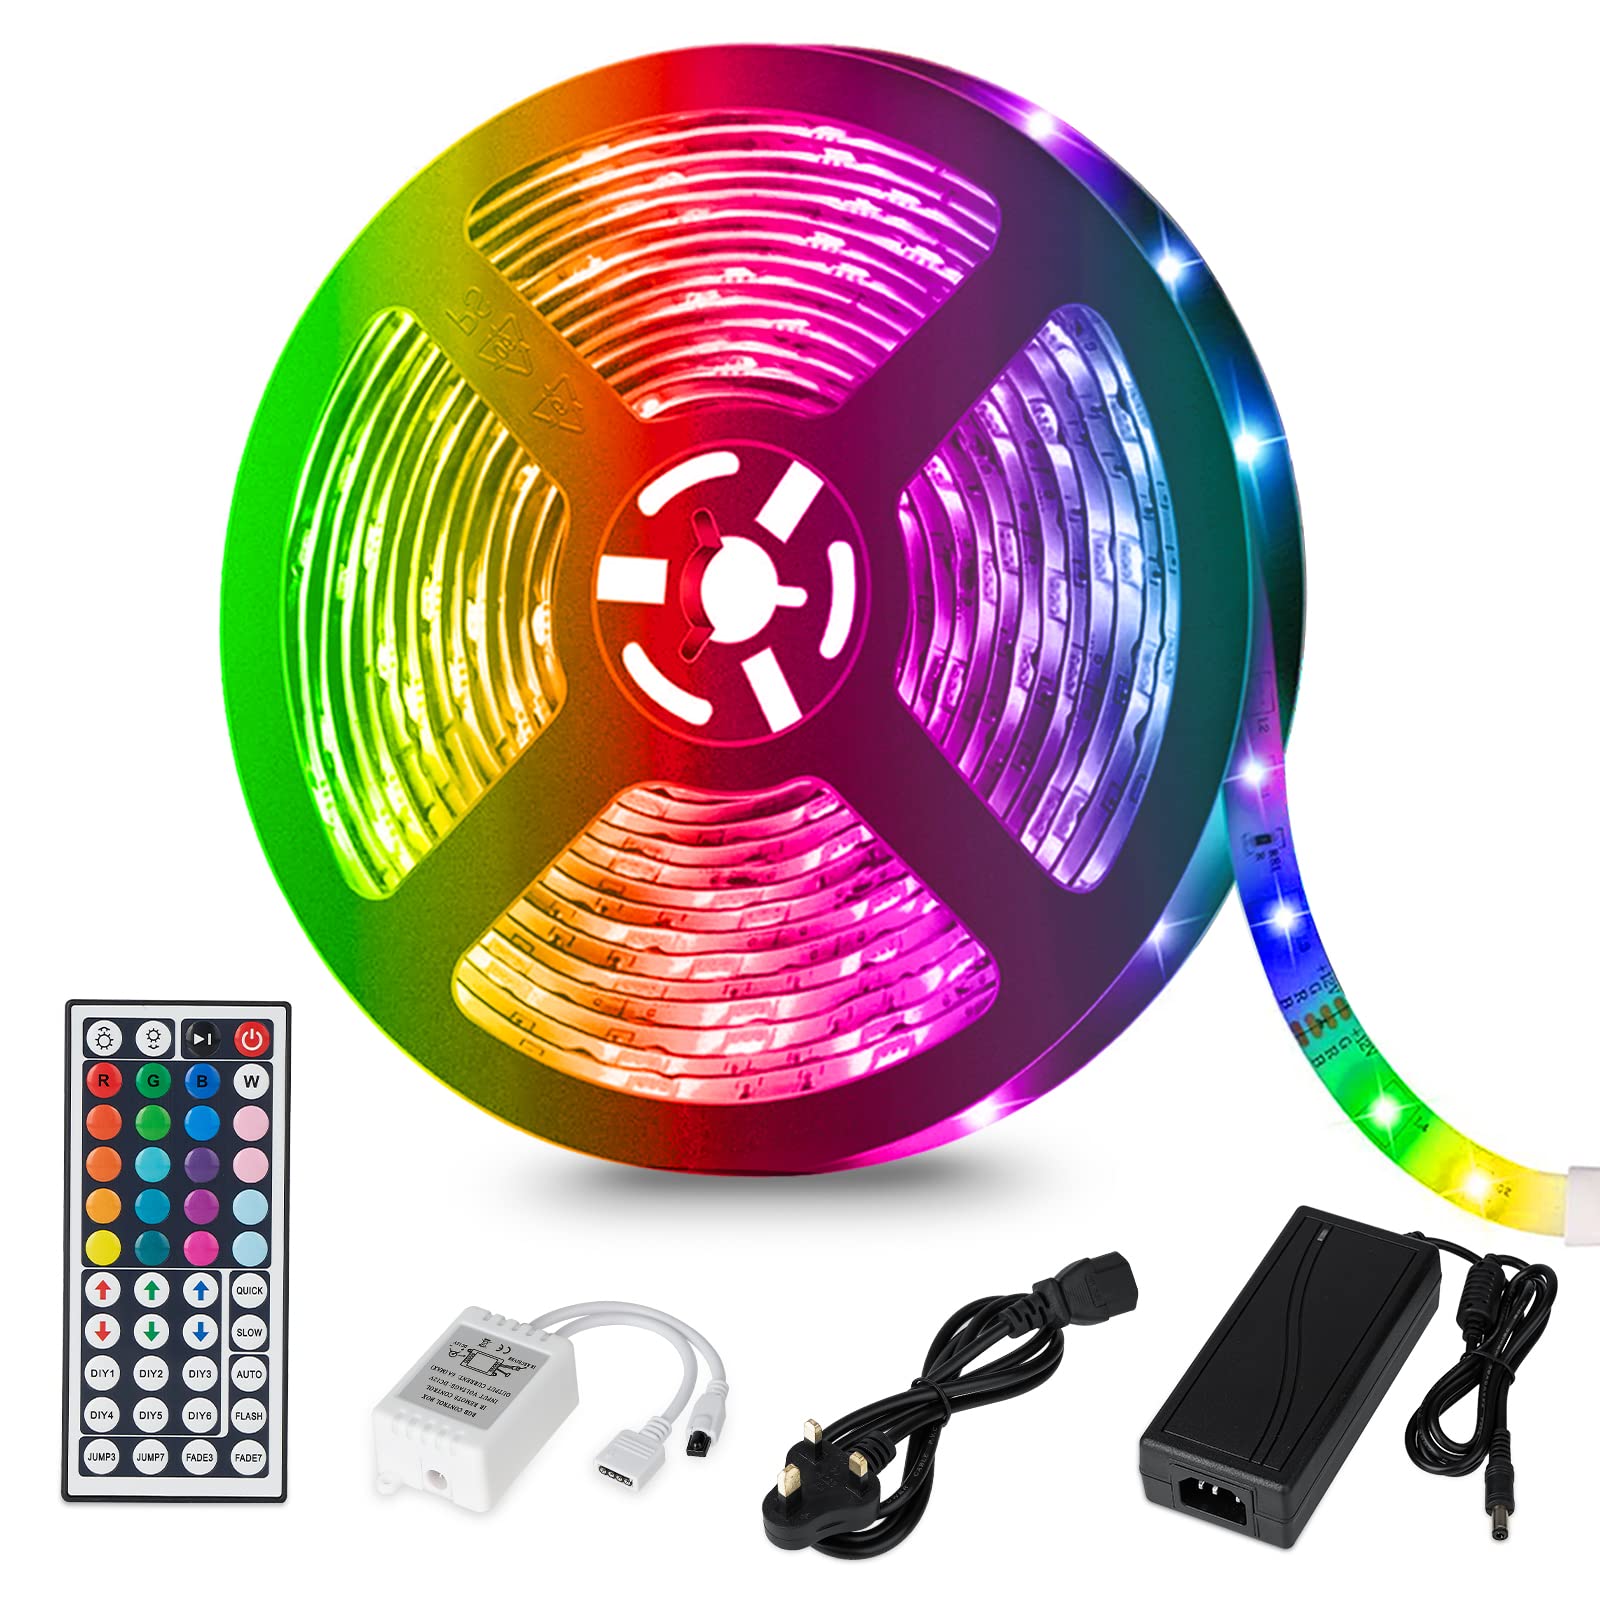 LED Strip Lights 5M with Remote SUNNEST RGB Light Strip Colour Changing for Home Car TV Stairs DIY Decoration